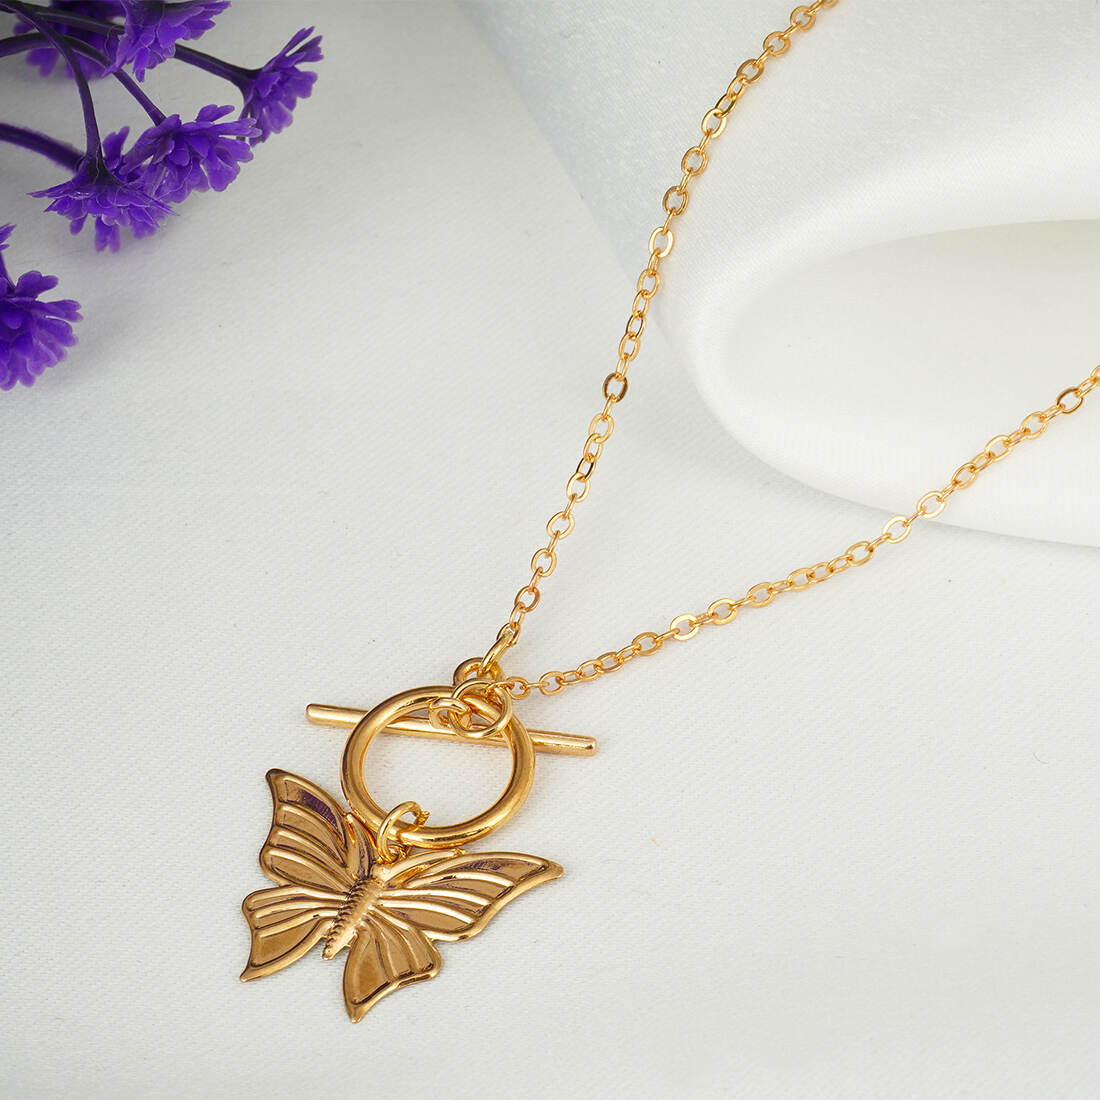 Florid Flimsy Butterfly Charm Chain Necklace